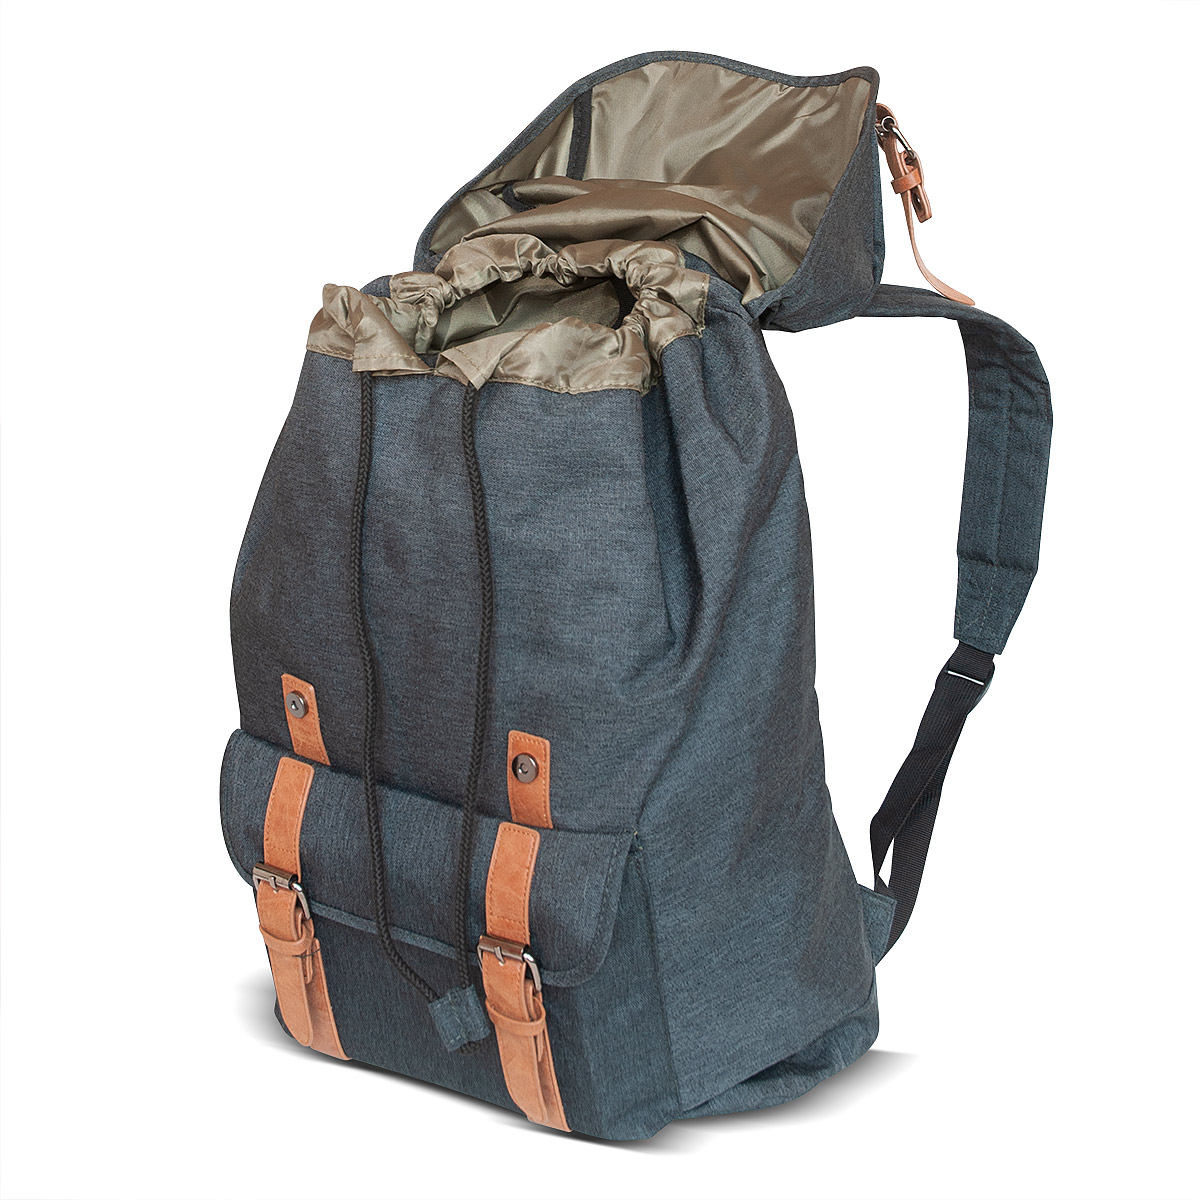 Goodyear City Backpack | Lifestyle | Goodyear Store